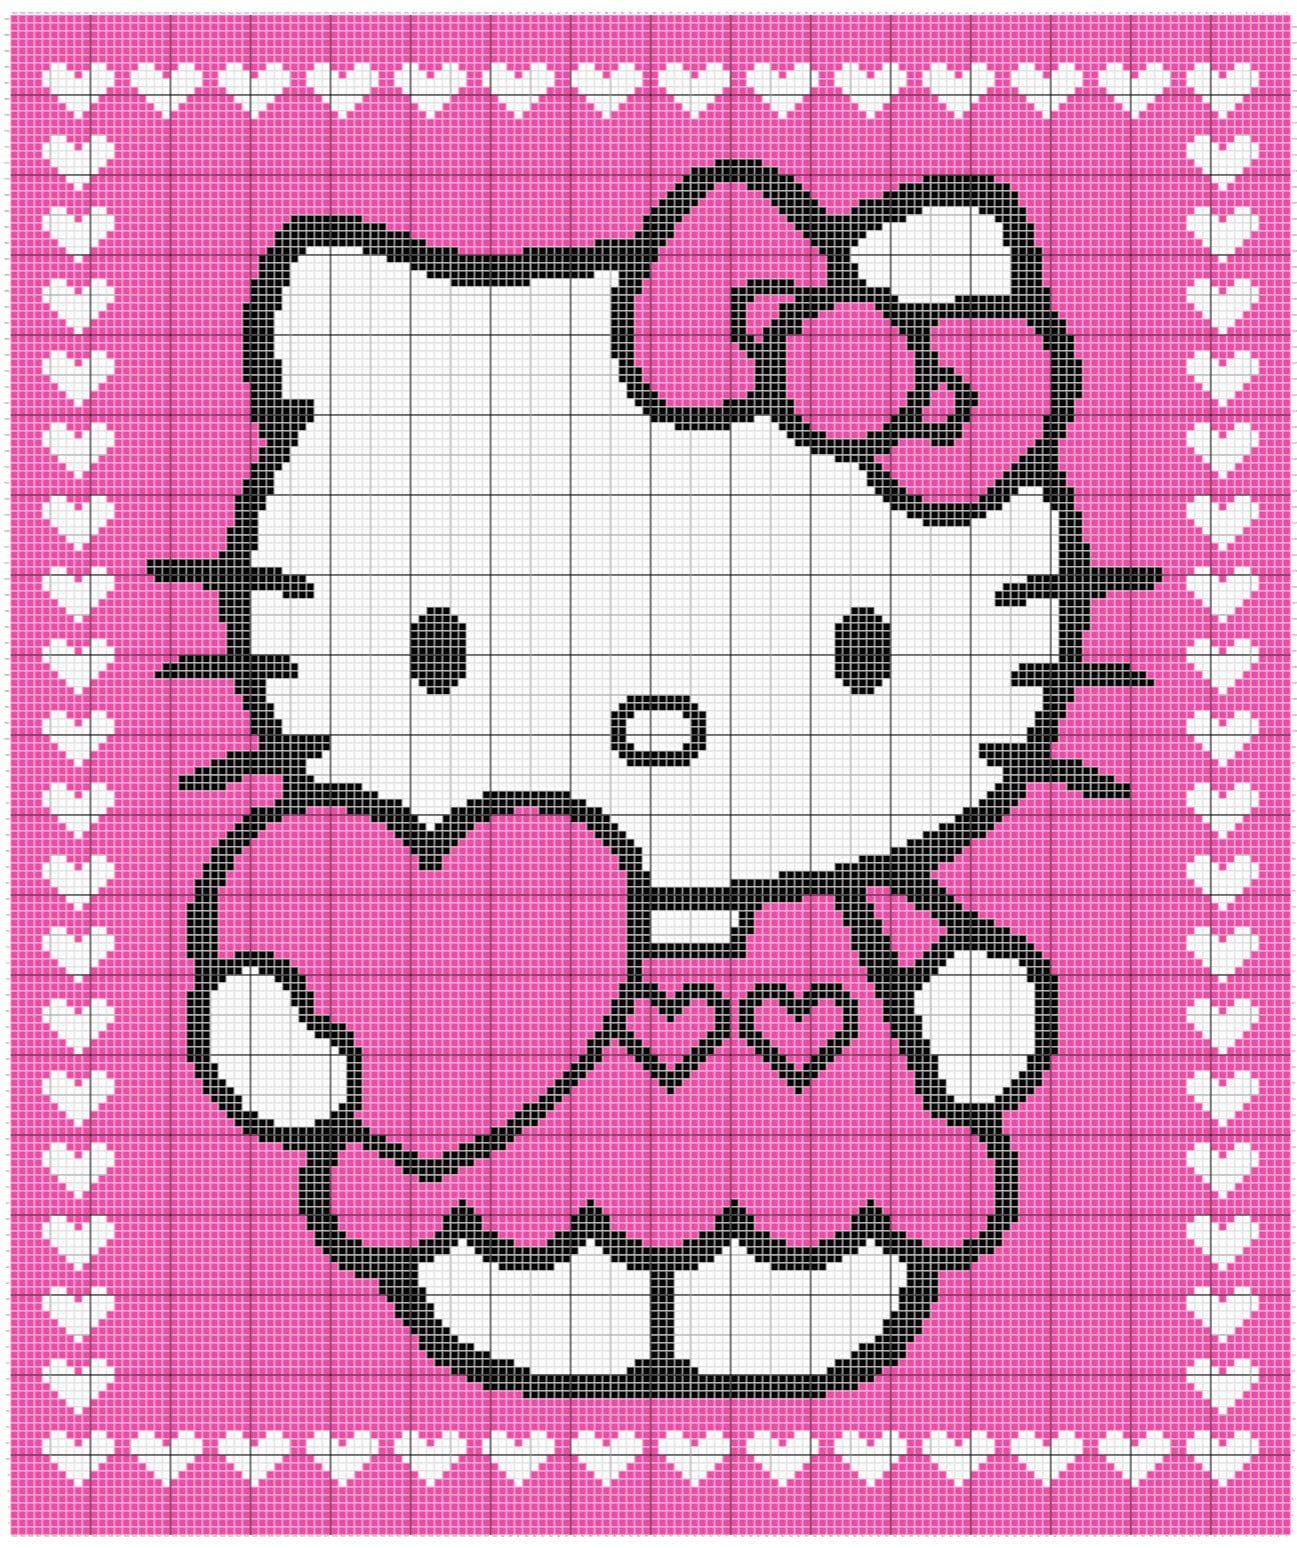 9 Lives And Counting: Hello Kitty Turns 40